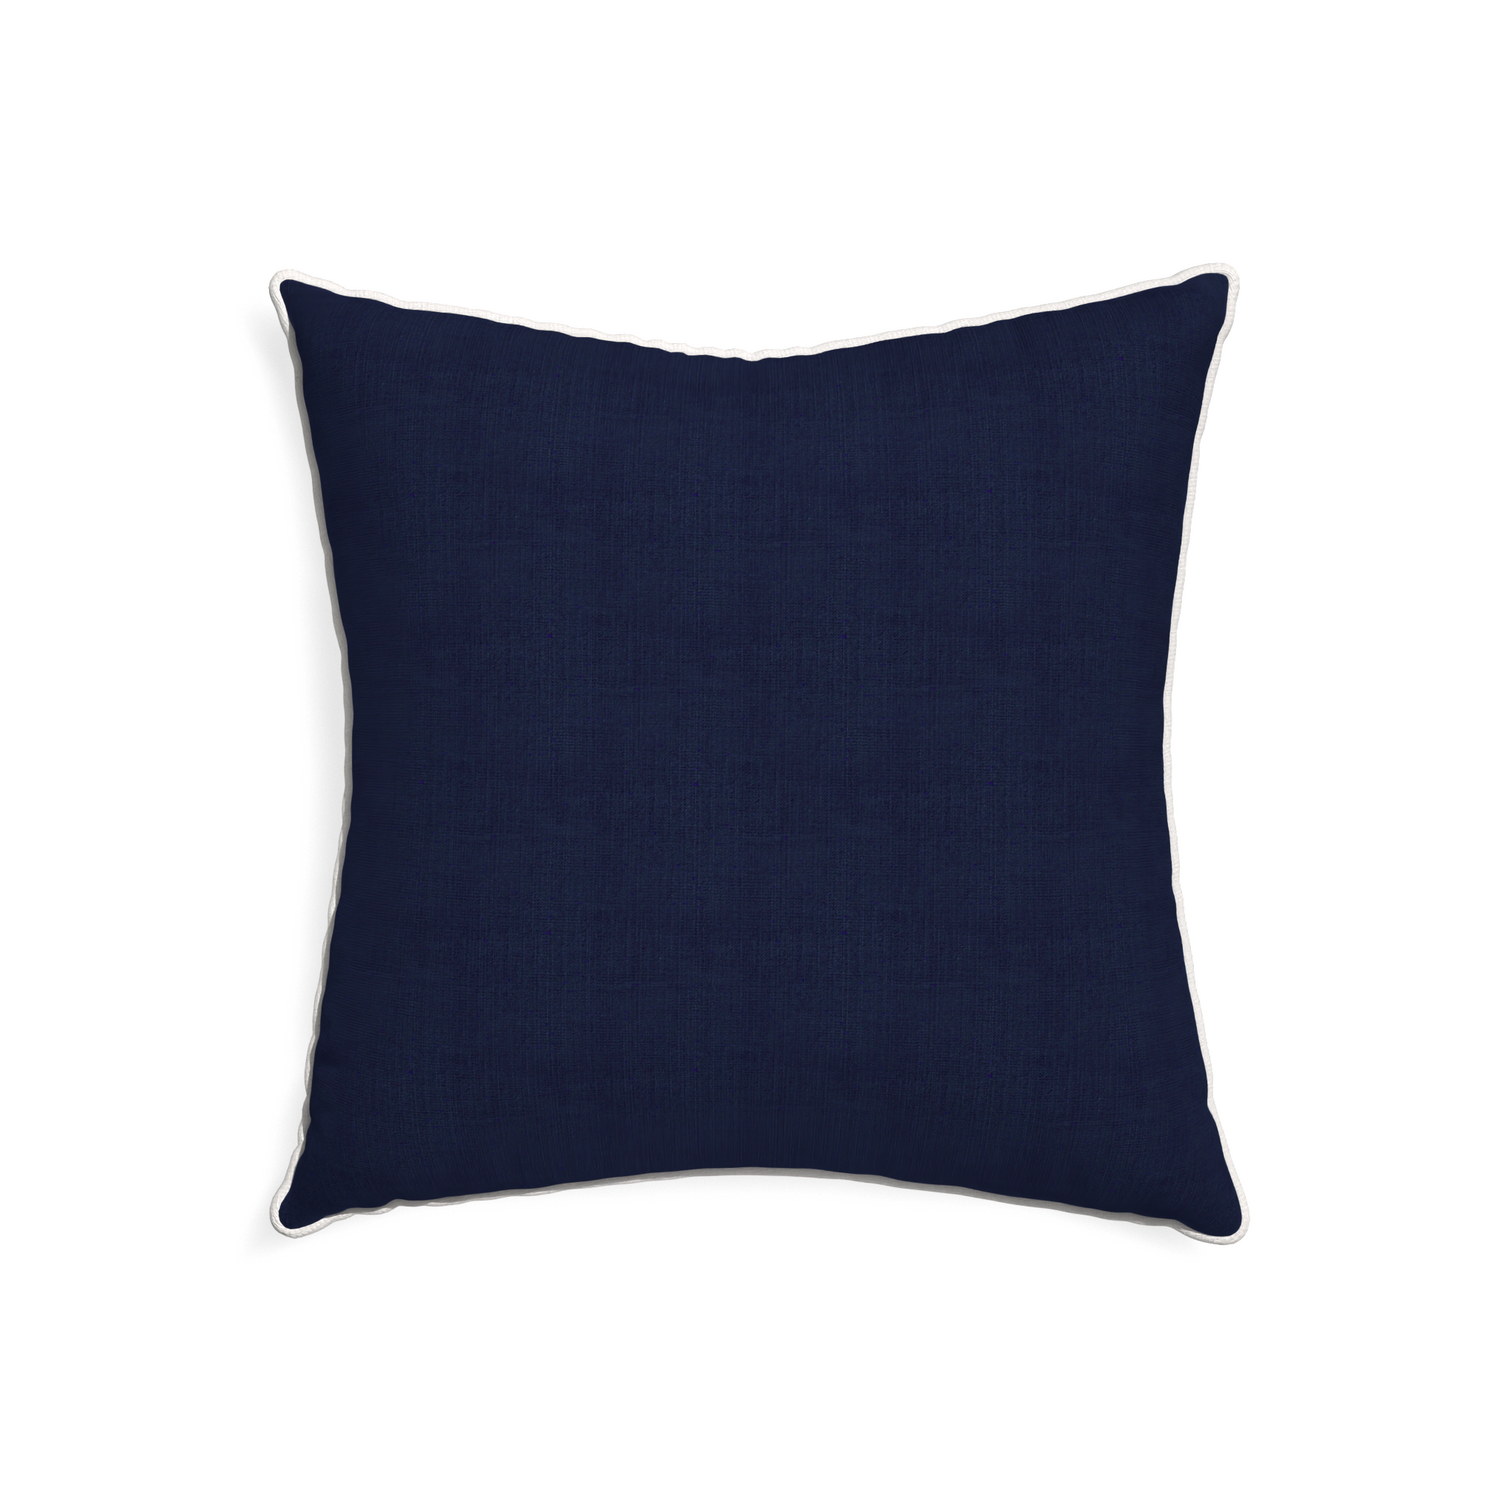 22-square midnight custom navy bluepillow with snow piping on white background